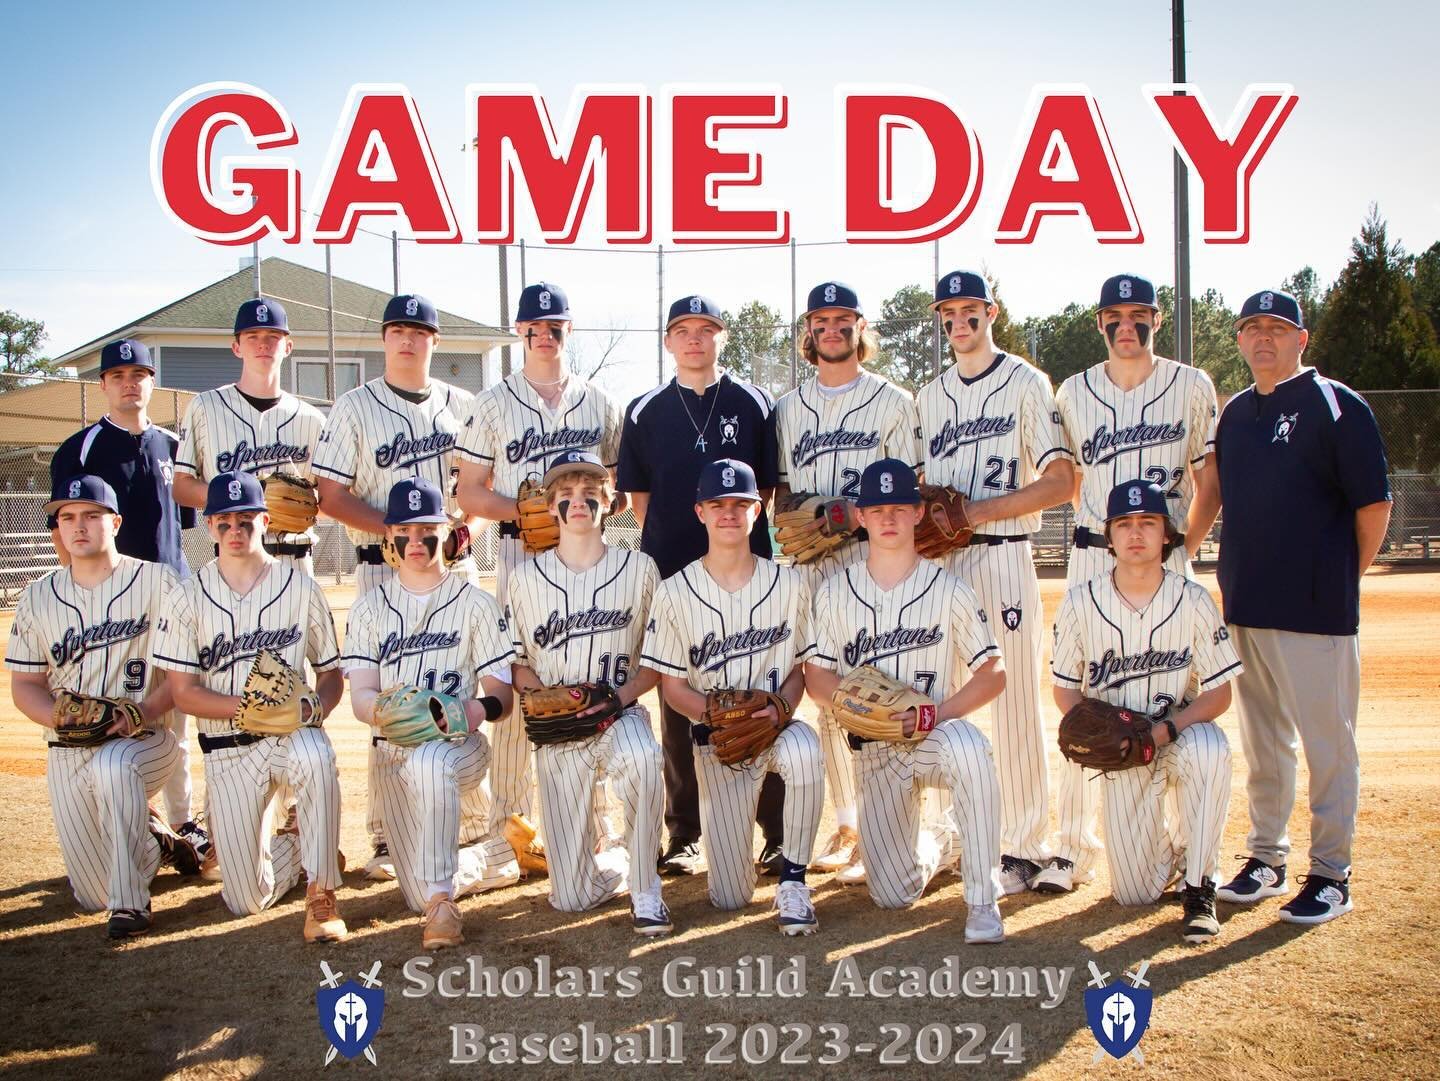 State Playoffs begin TODAY for your SGA Spartans! Come support the team in the quarterfinals as they play a doubleheader against Creekside at West Walton starting at 3pm! Buy your tickets at the gate or here: https://gofan.co/event/1506299?schoolId=G